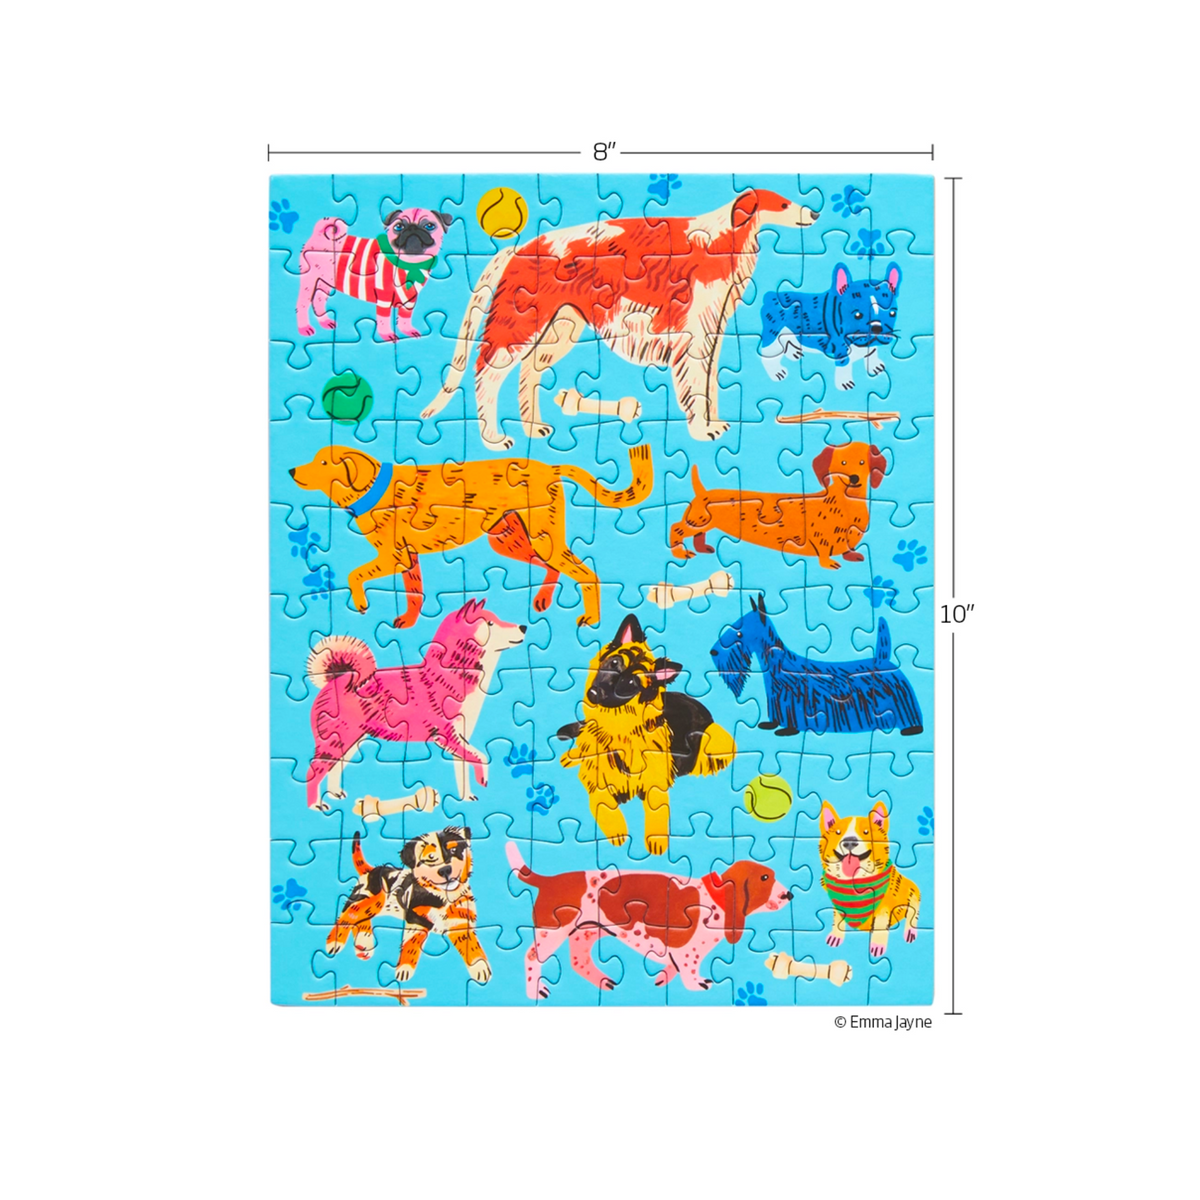 Pooches Playtime 100 Piece Puzzle Snax